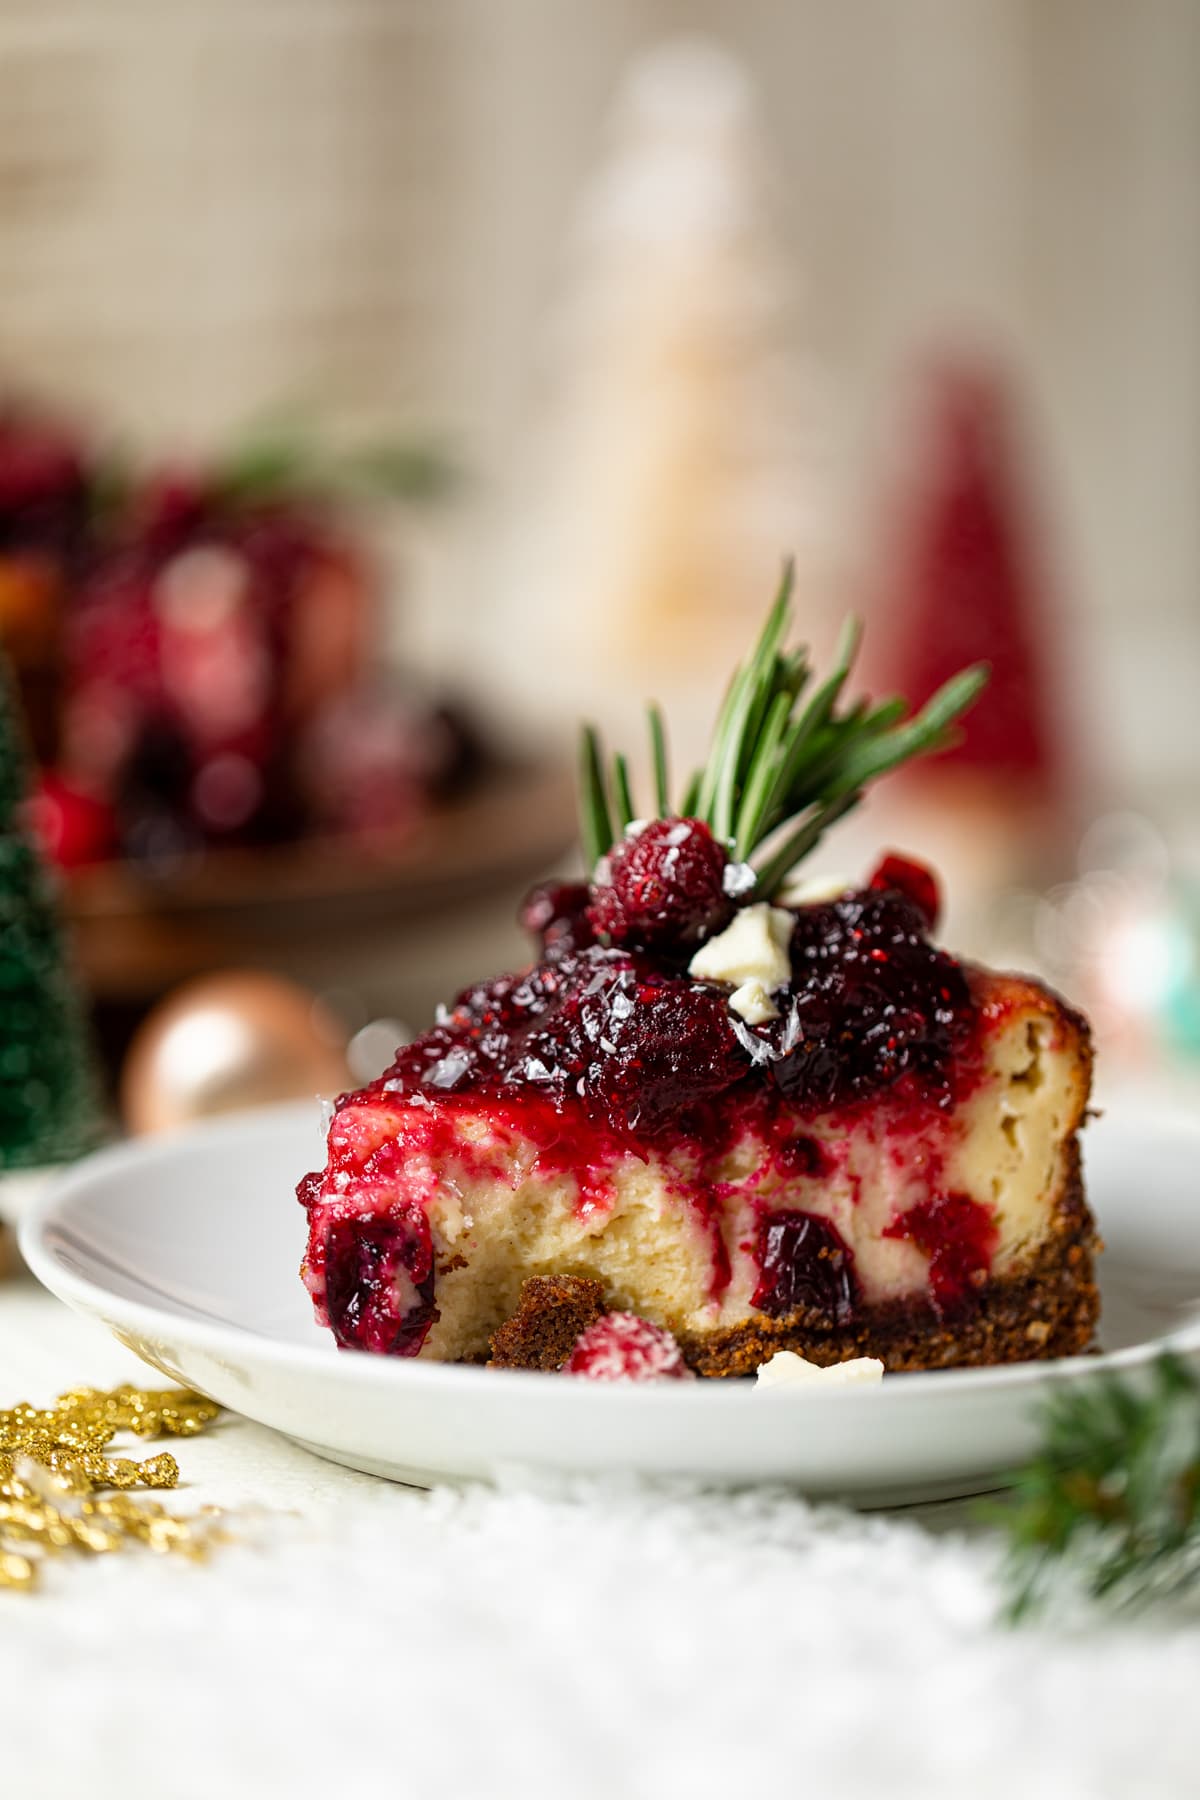 Slice of White Chocolate Cheesecake with Cranberries on a small plate